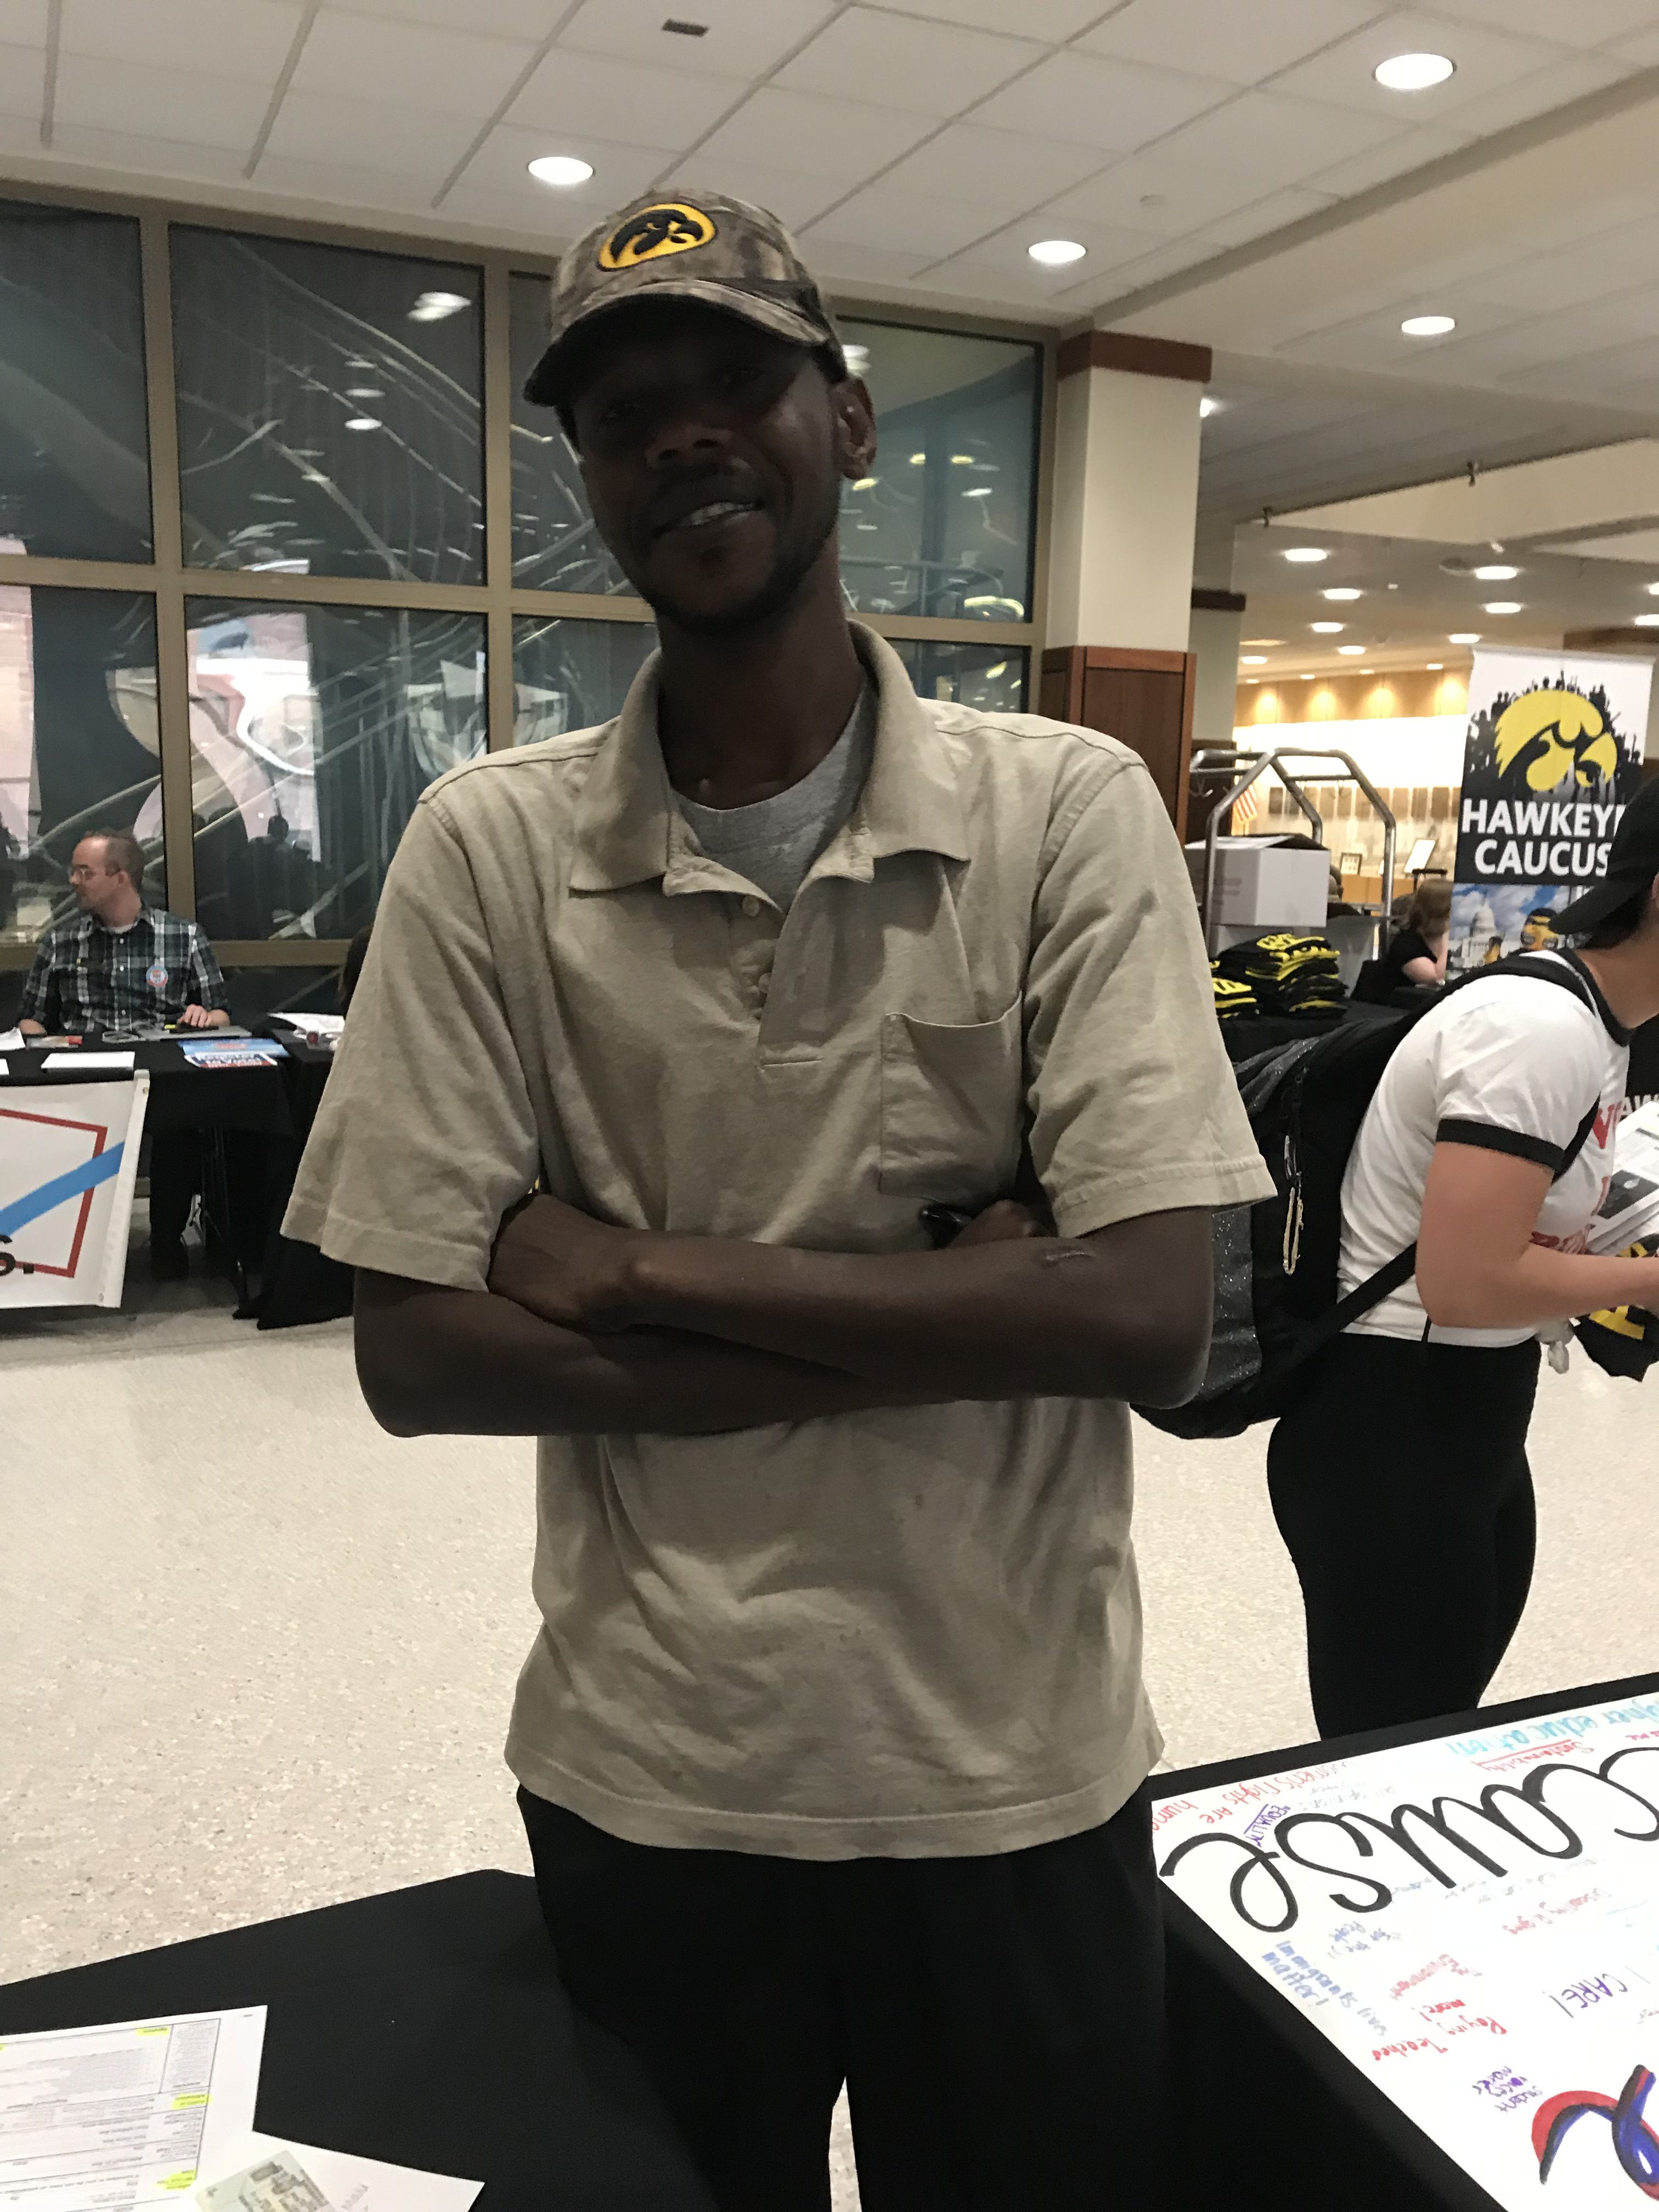 This is Mohammed. Mohammed is a student at the University of Iowa where he is in the International Studies program. He registered to vote for the first time with our Iowa Director as he became a citizen three months ago. This November will be his first election!